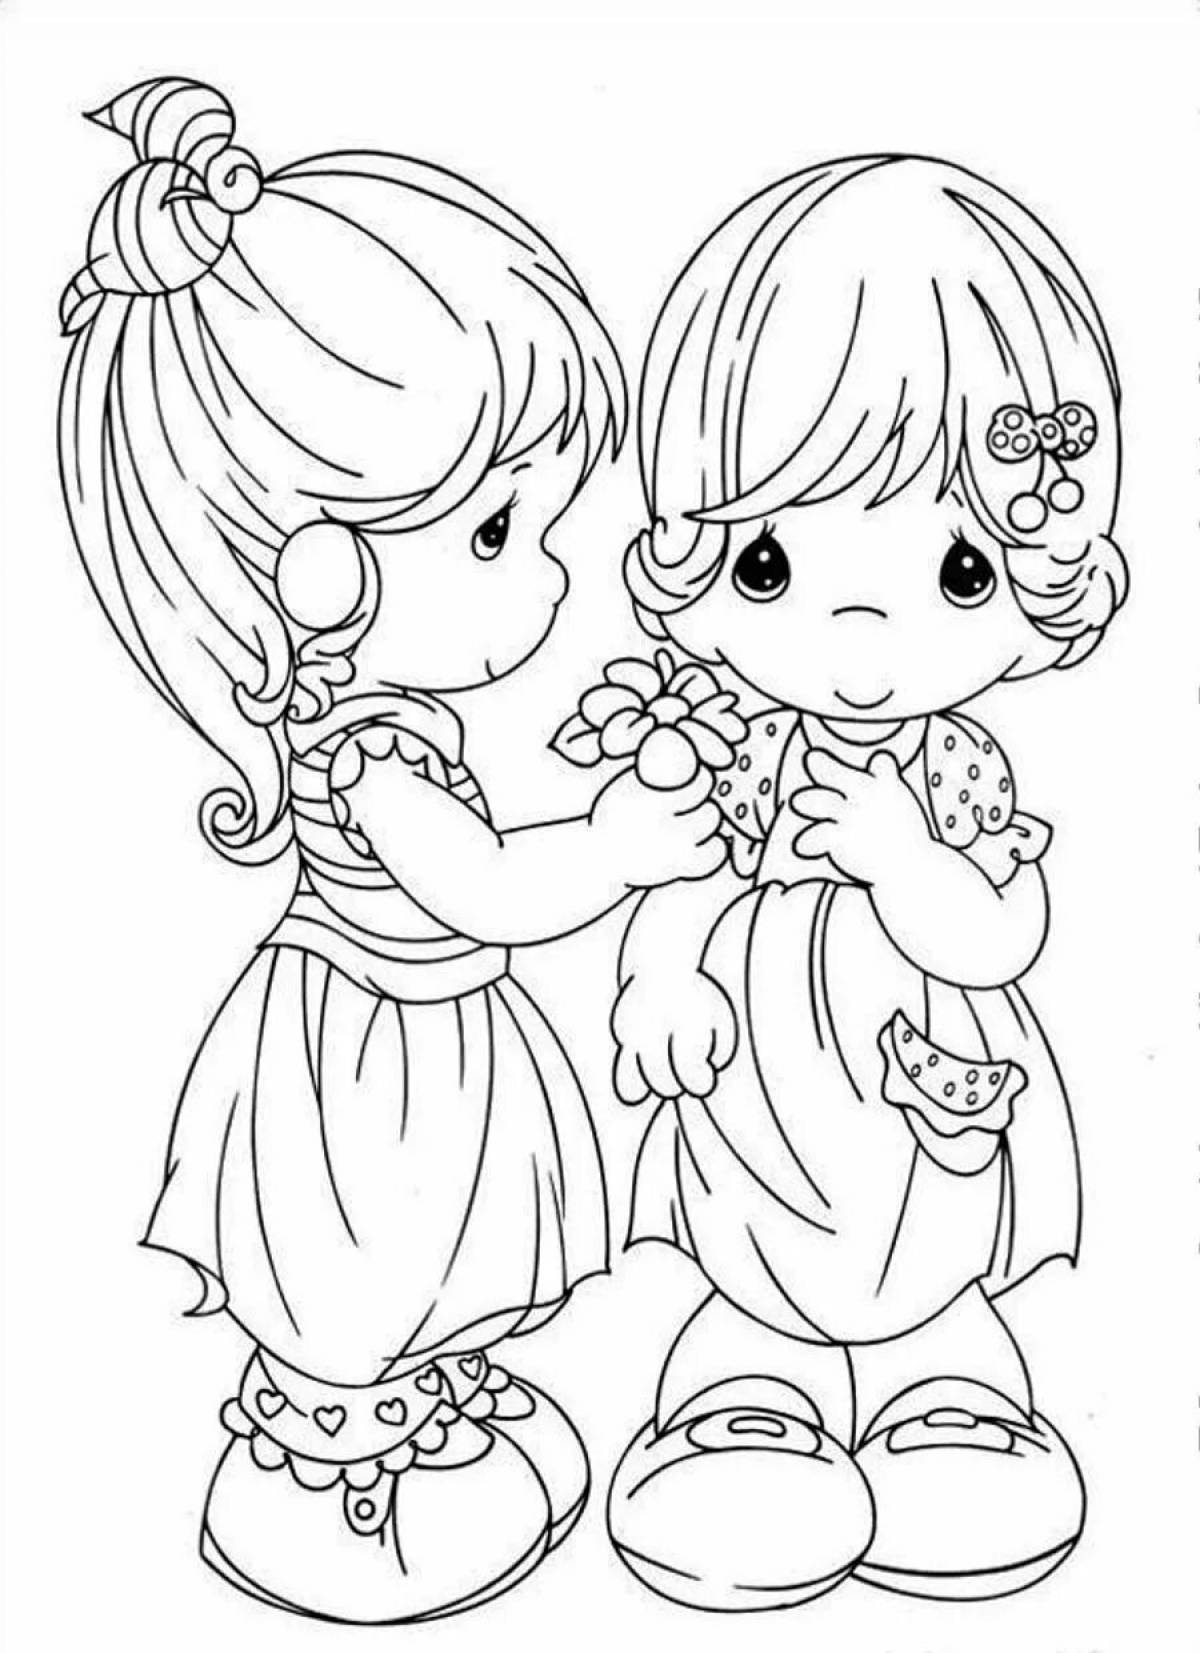 Colourful coloring pages for girls and girlfriends